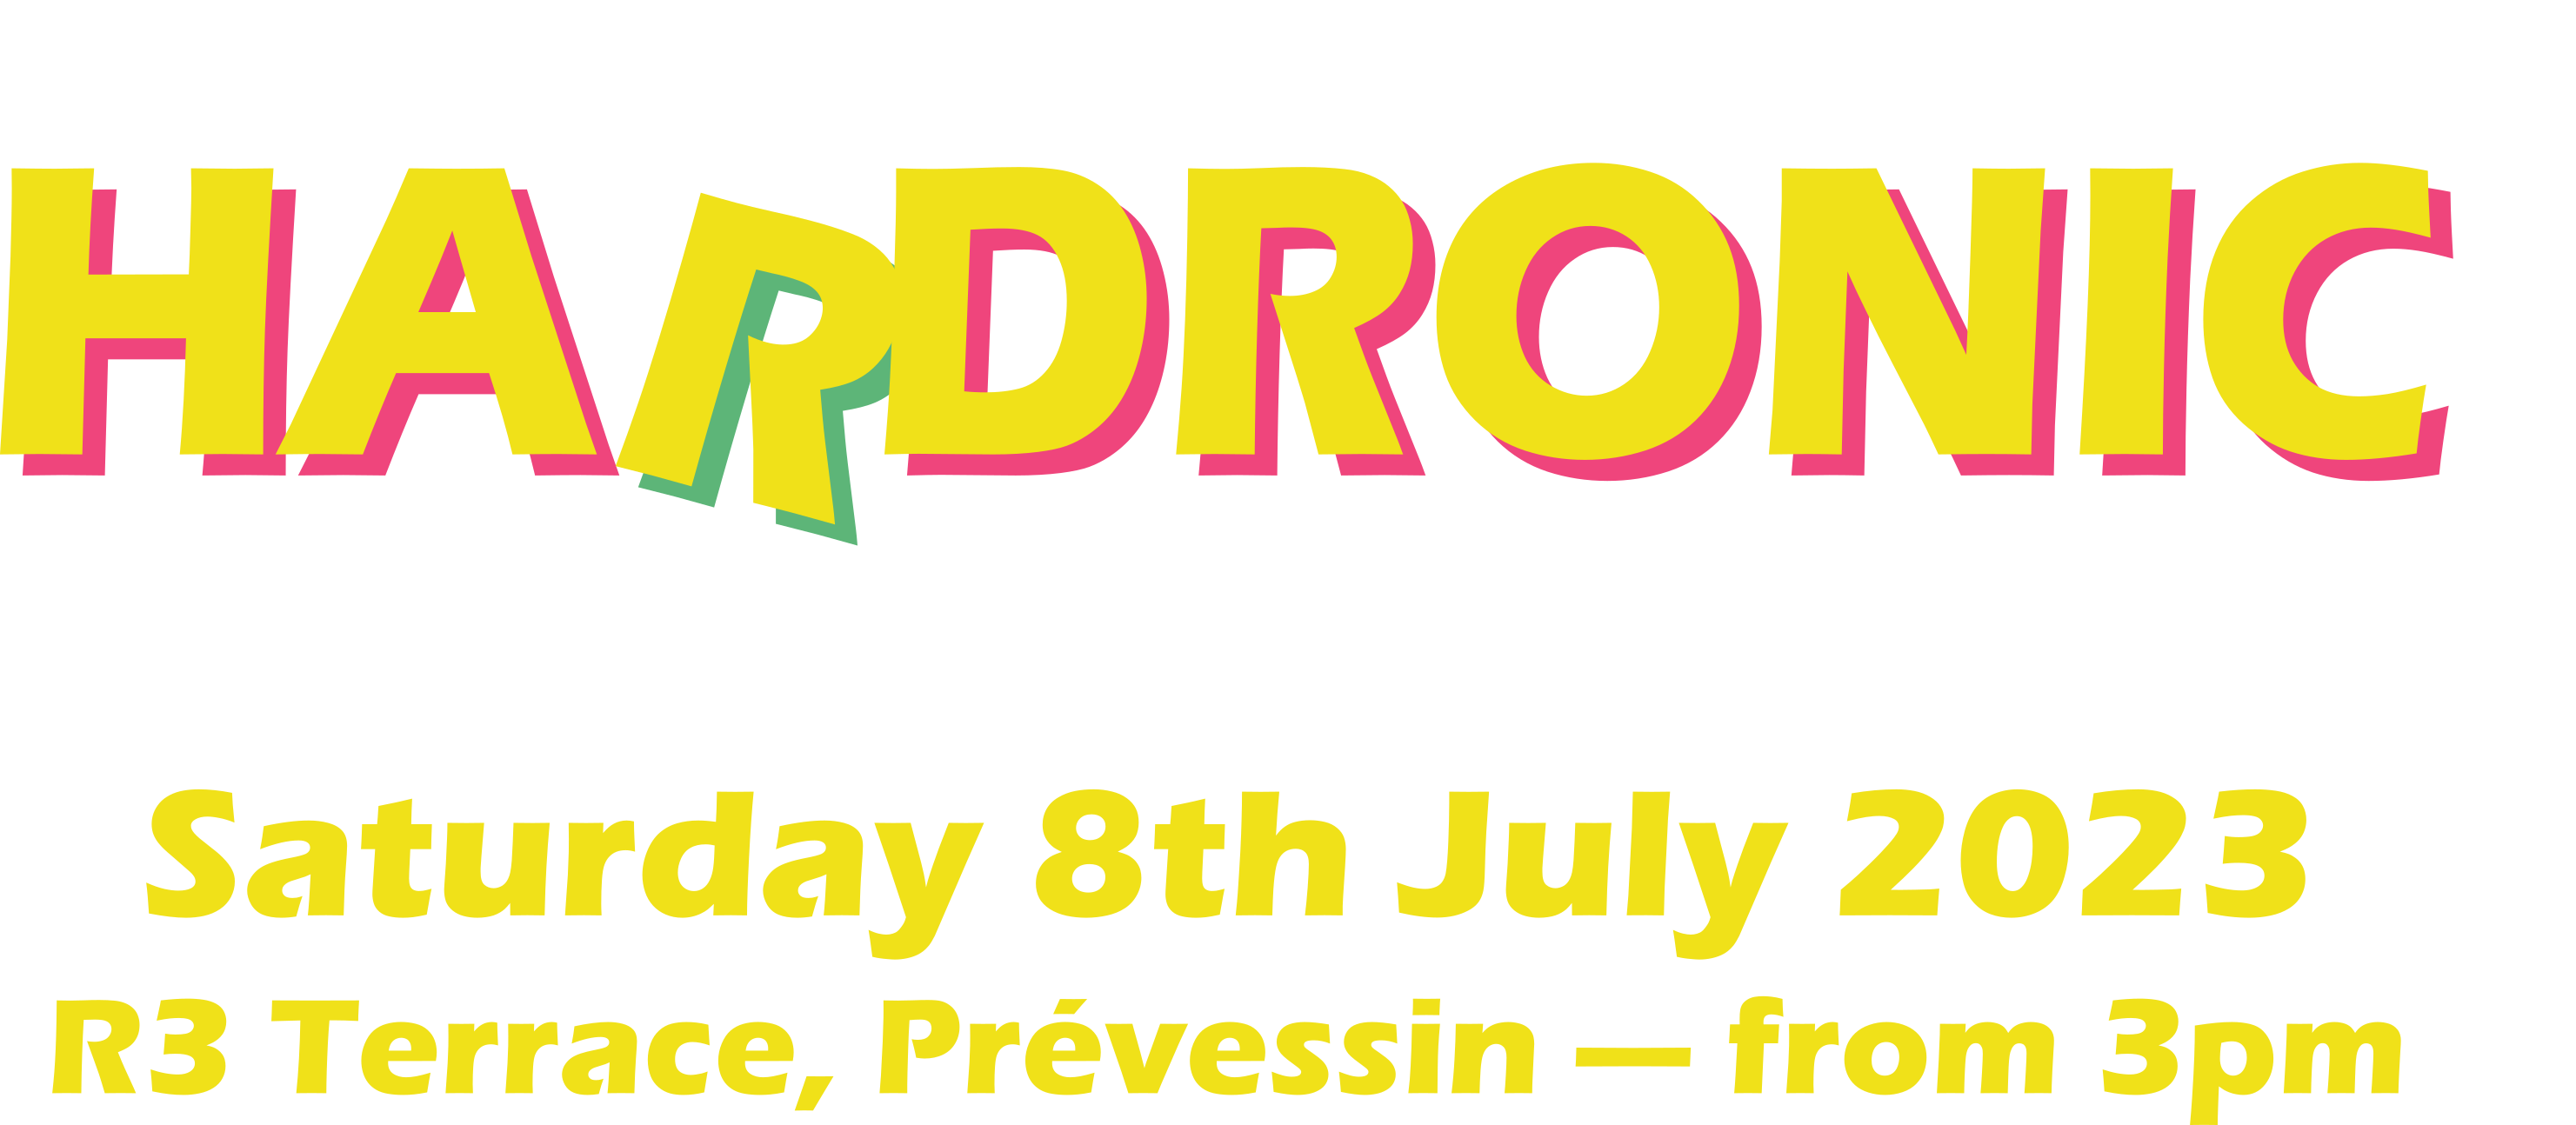 CERN MusiClub presents... Hardronic Music Festival vol.2023. Saturday 8th July 2023. R3 Terrace Prévessin - from 3pm.